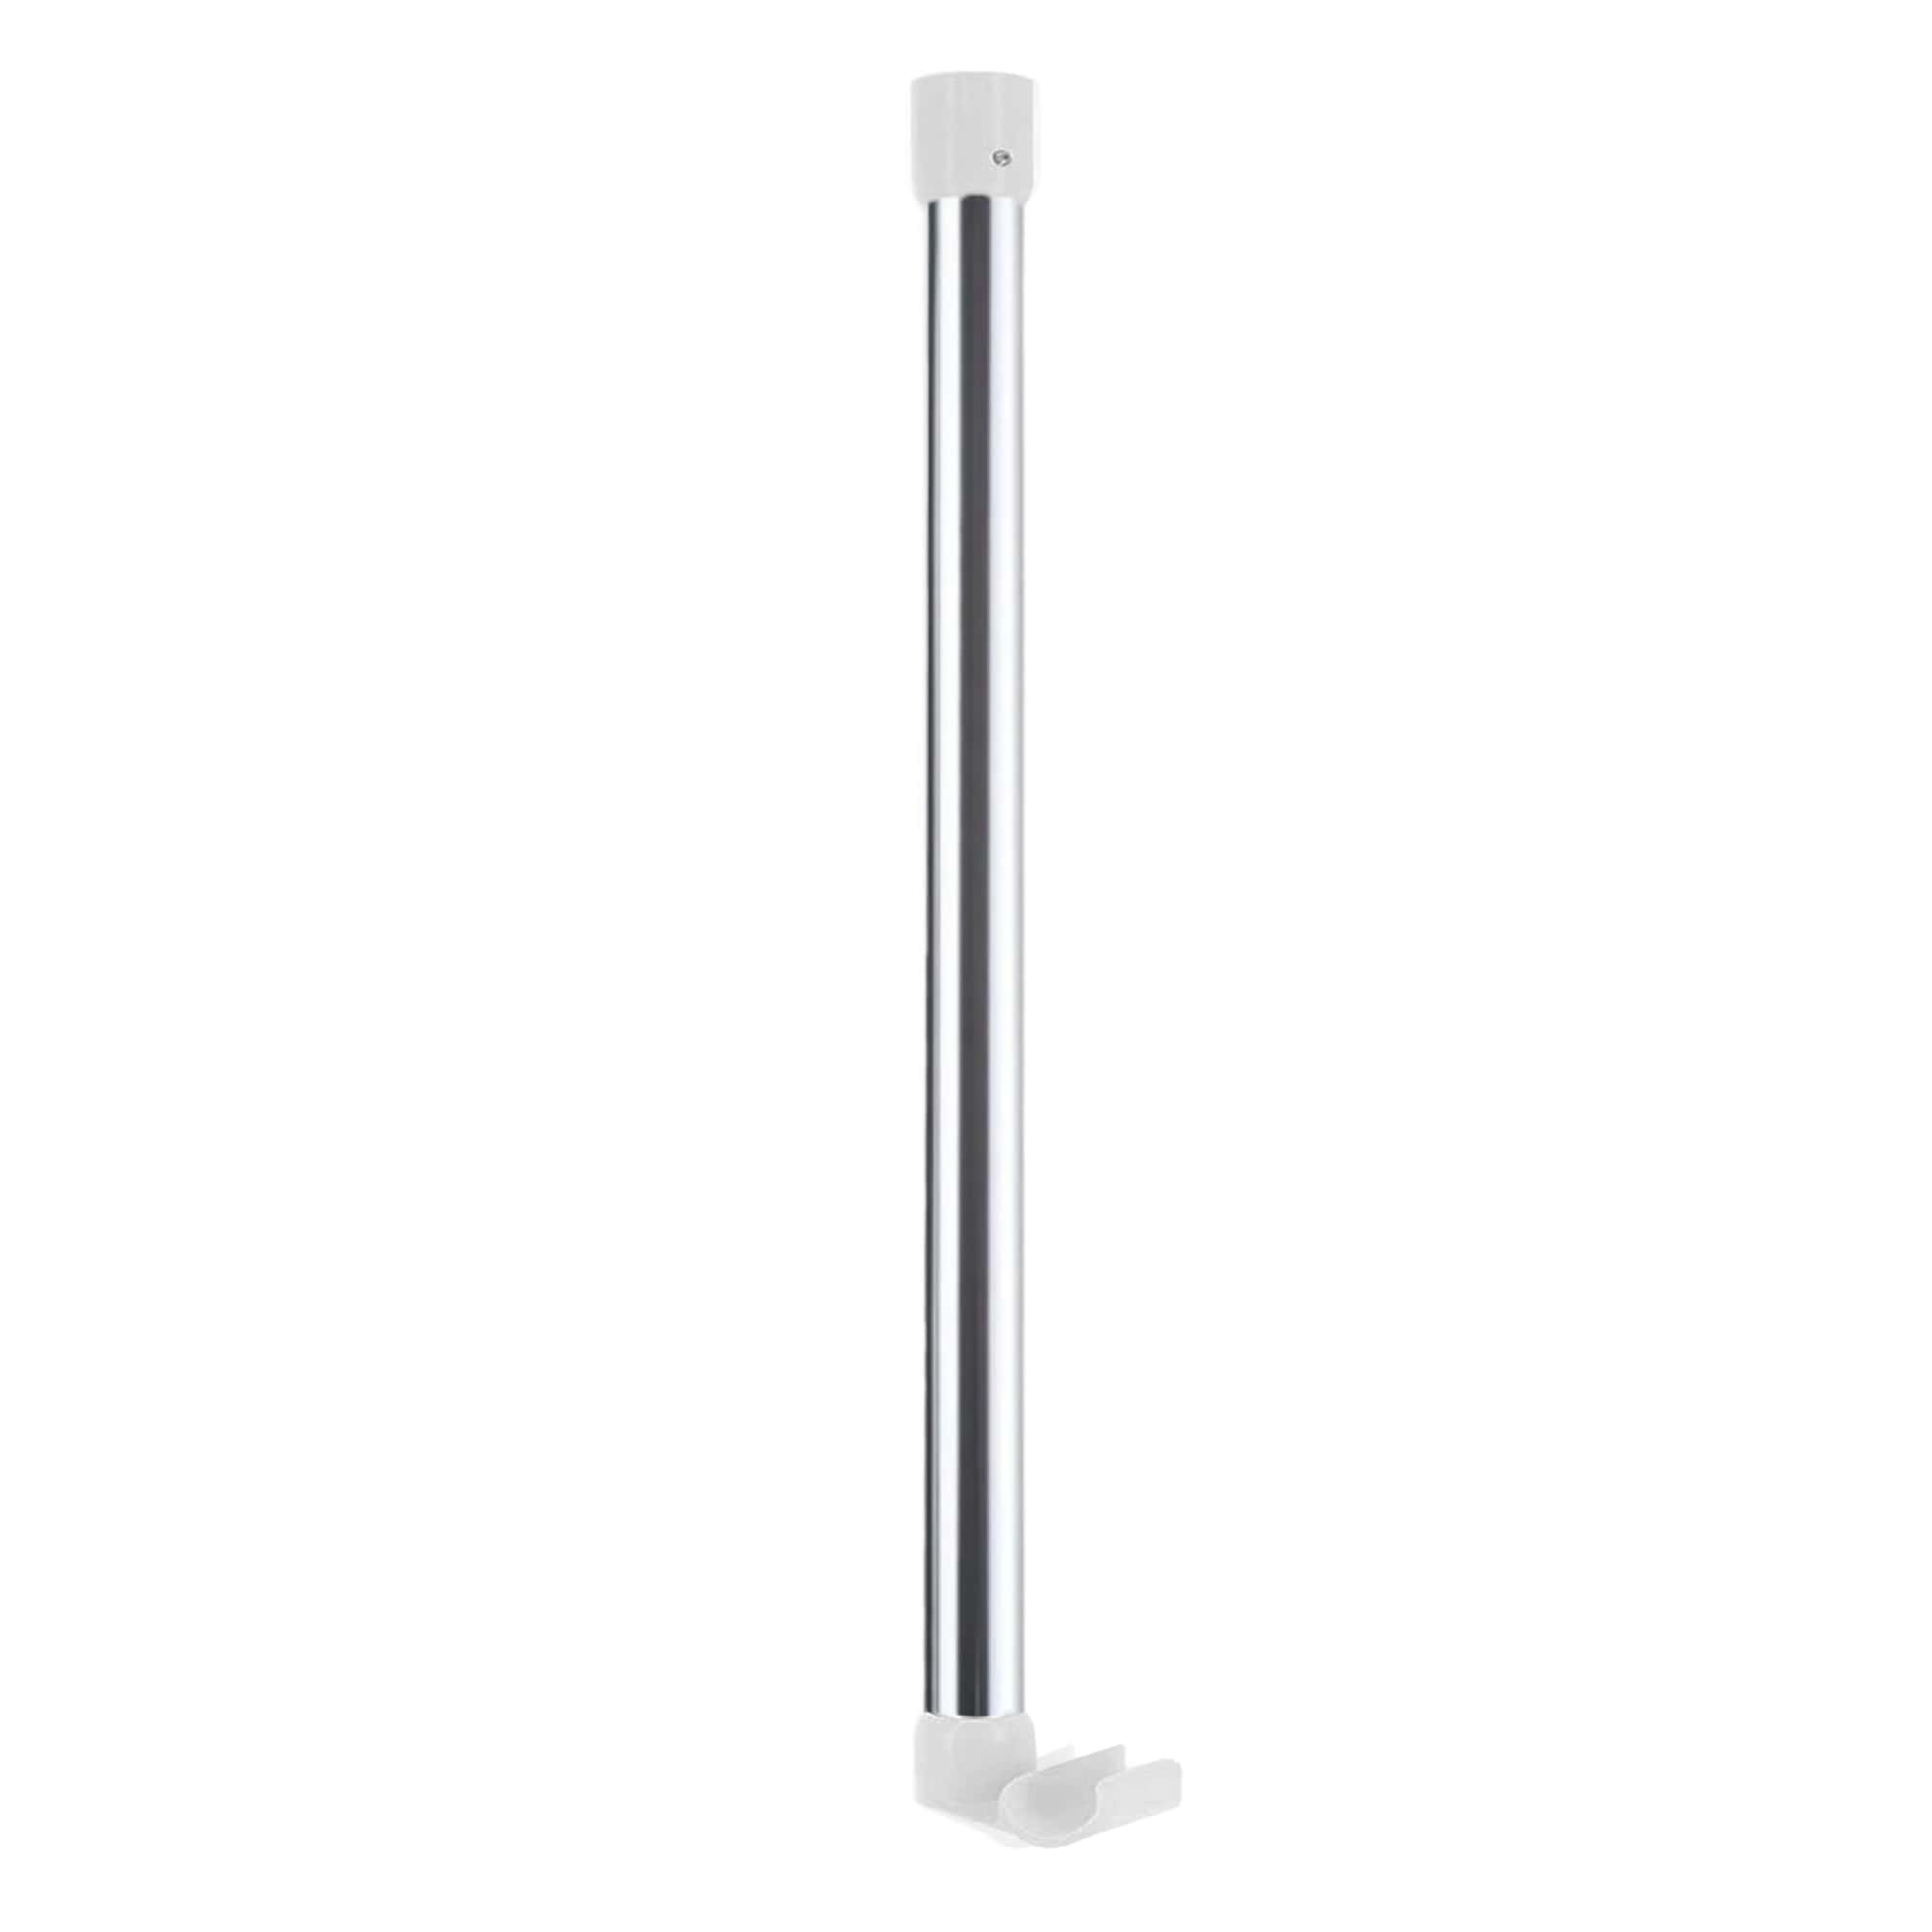 Single chrome ceiling support rod for holding shower curtain rod